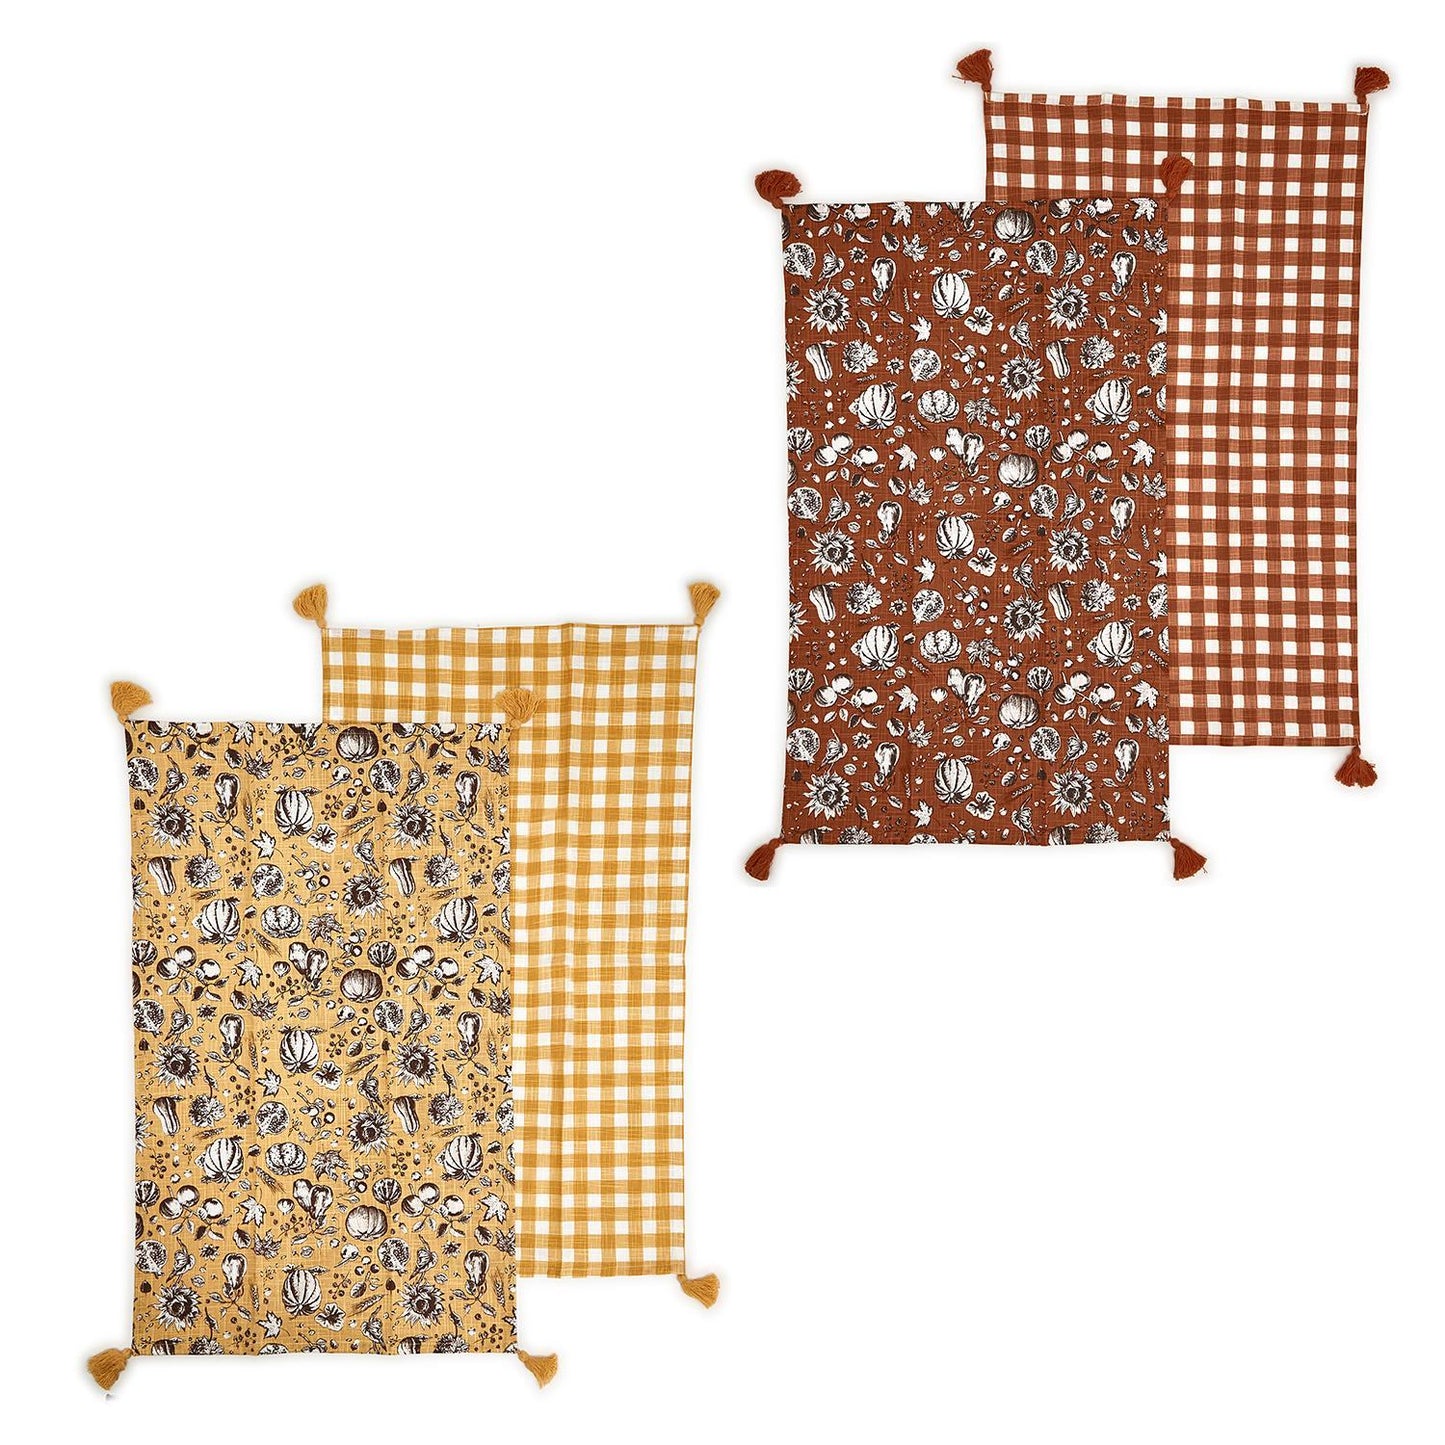 Autumn Soiree Assorted of 4 Designs Dish/Kitchen Towels in 2 Patterns/Colors